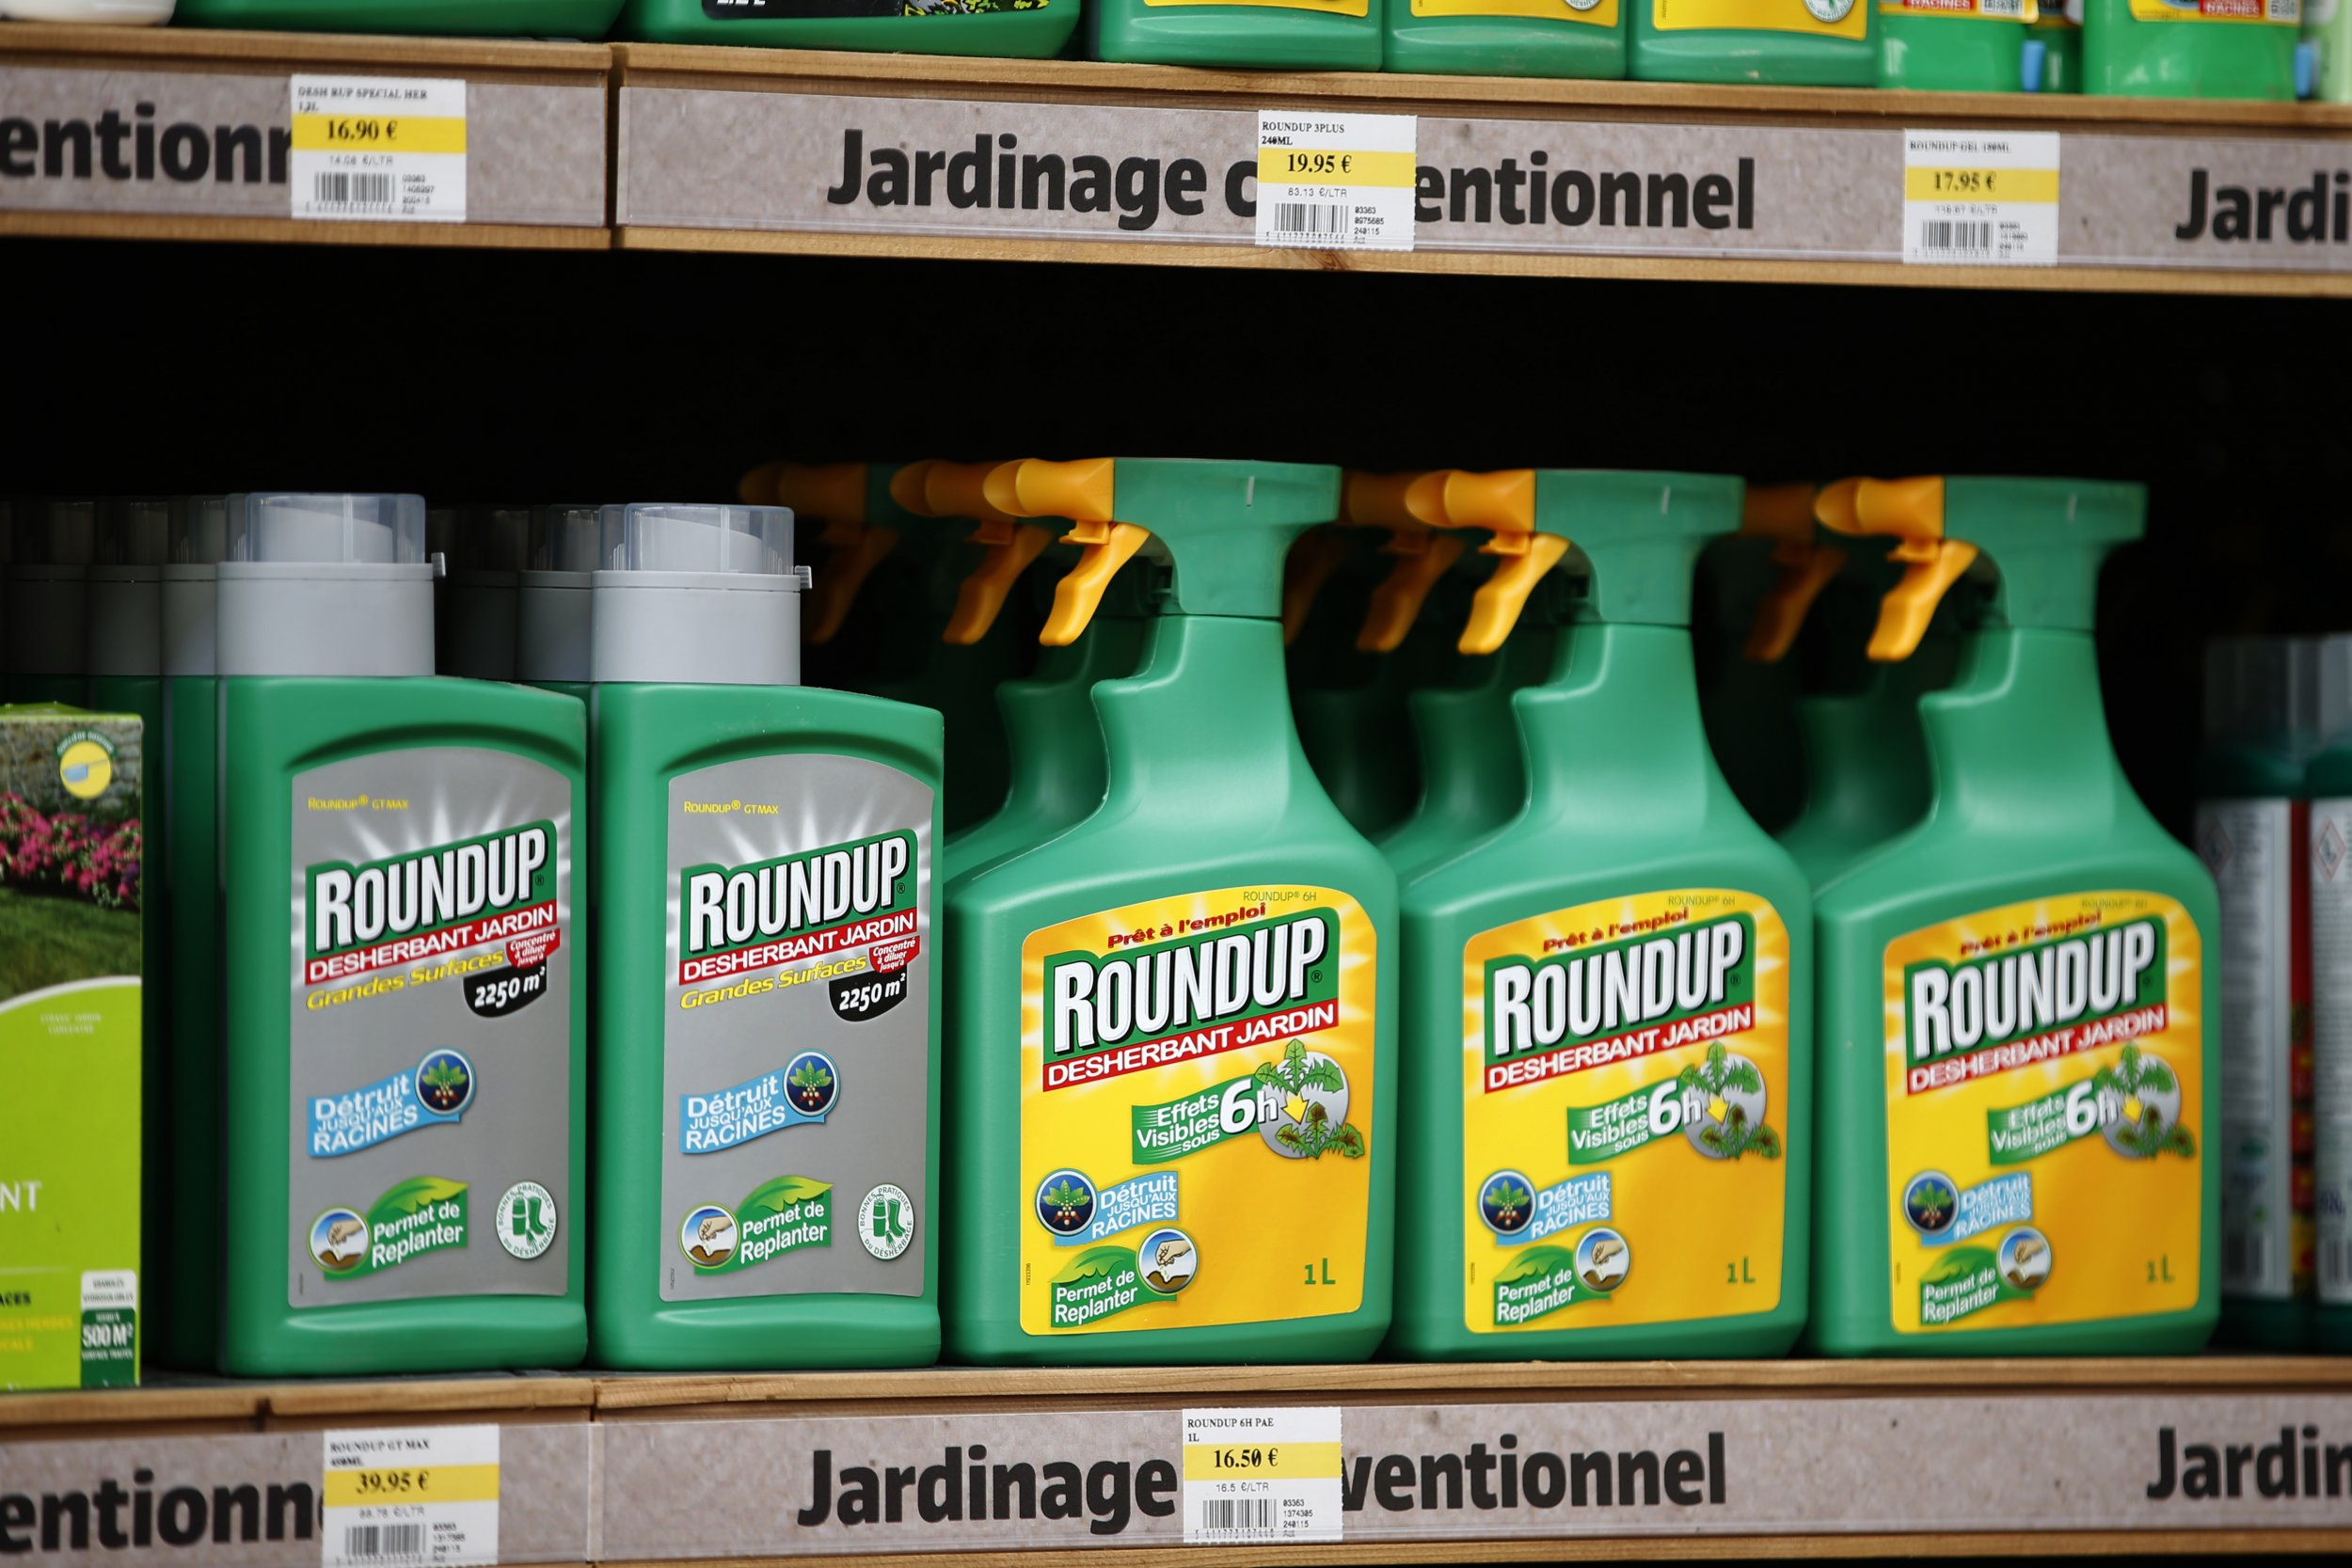 Residues of Roundup Glyphosate on Food to be Monitored for the First Time